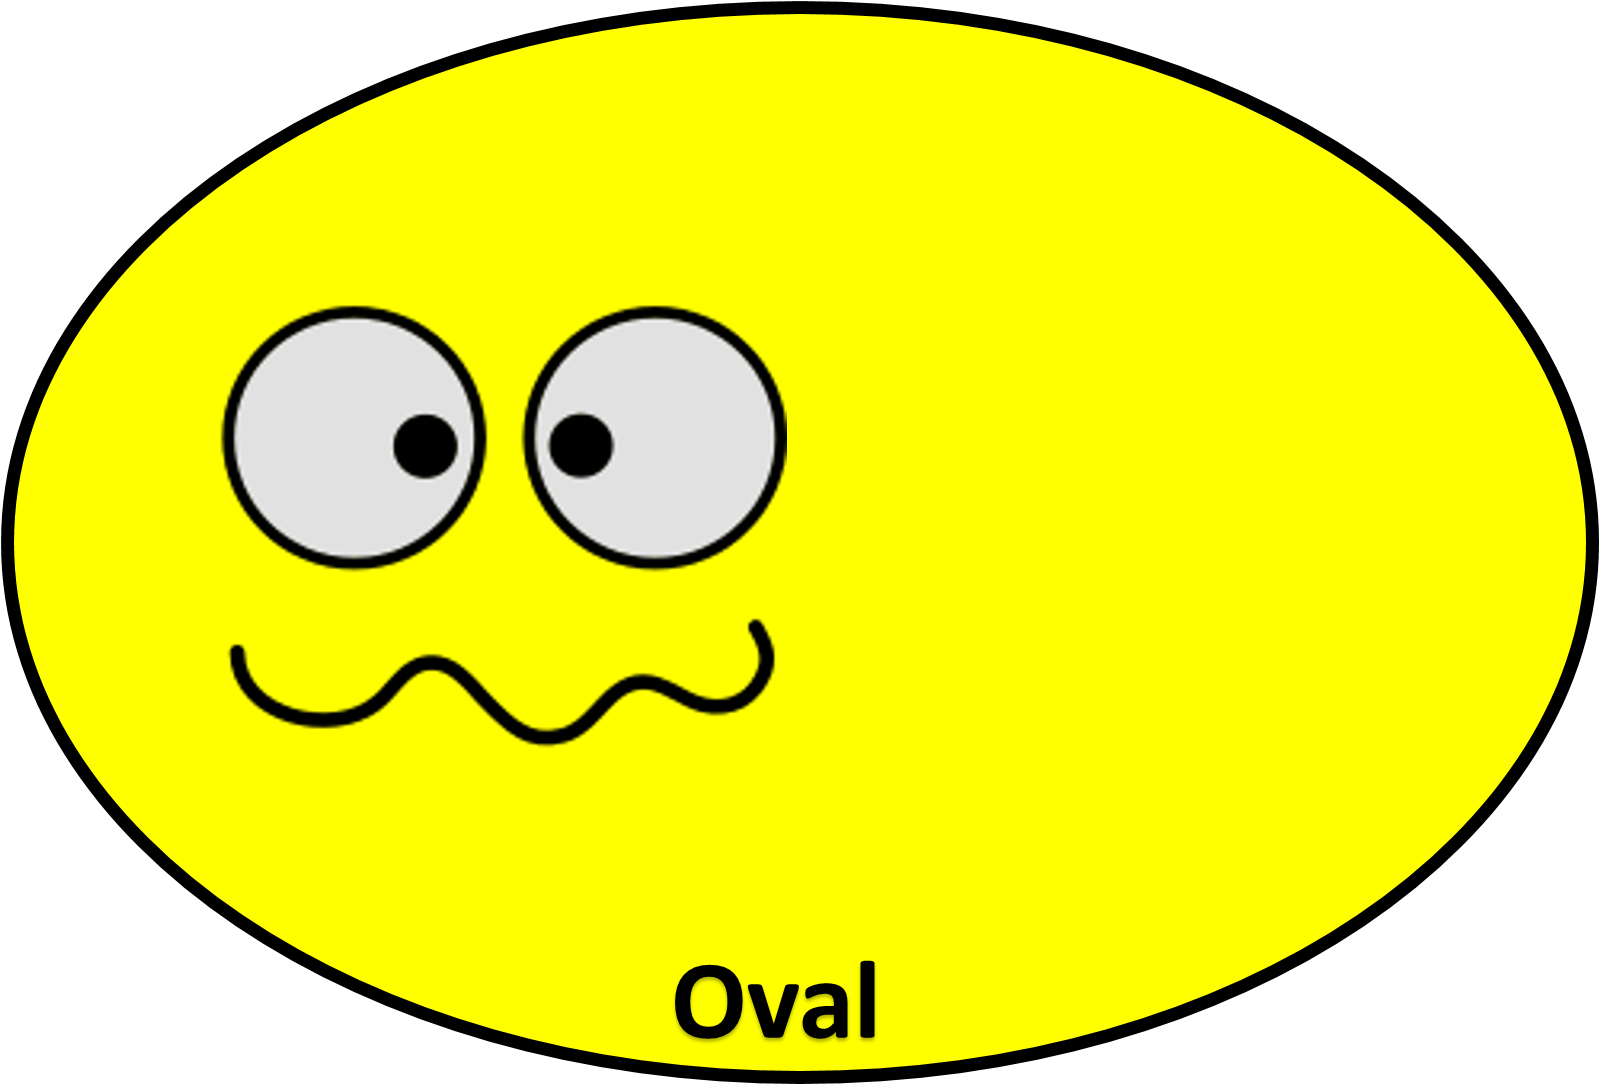 A Yellow Oval With A Face And A Black Background